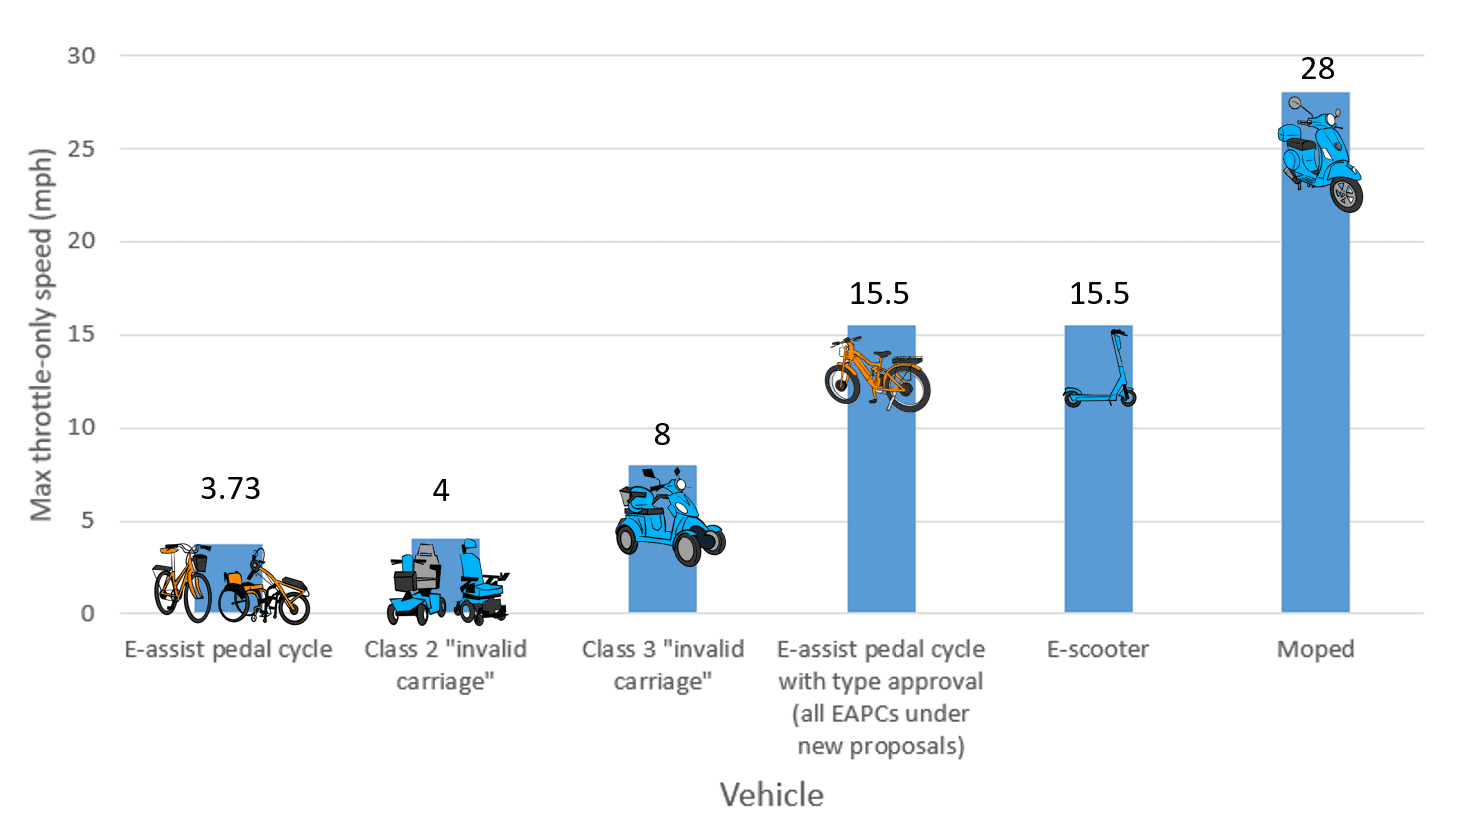 Graph shows speeds:
E-assist pedal cycle (picture of bicycle and handcycle) 3.73,
Class 2 "invalid carriage" (picture of powerchair and small mobility scooter) 4,
Class 3 "invalid carriage" (picture of large mobility scooter) 8,
E-assist pedal cycle with type approval (all EAPCs under new proposal) 15.5,
E-scooter 15.5
Moped 28